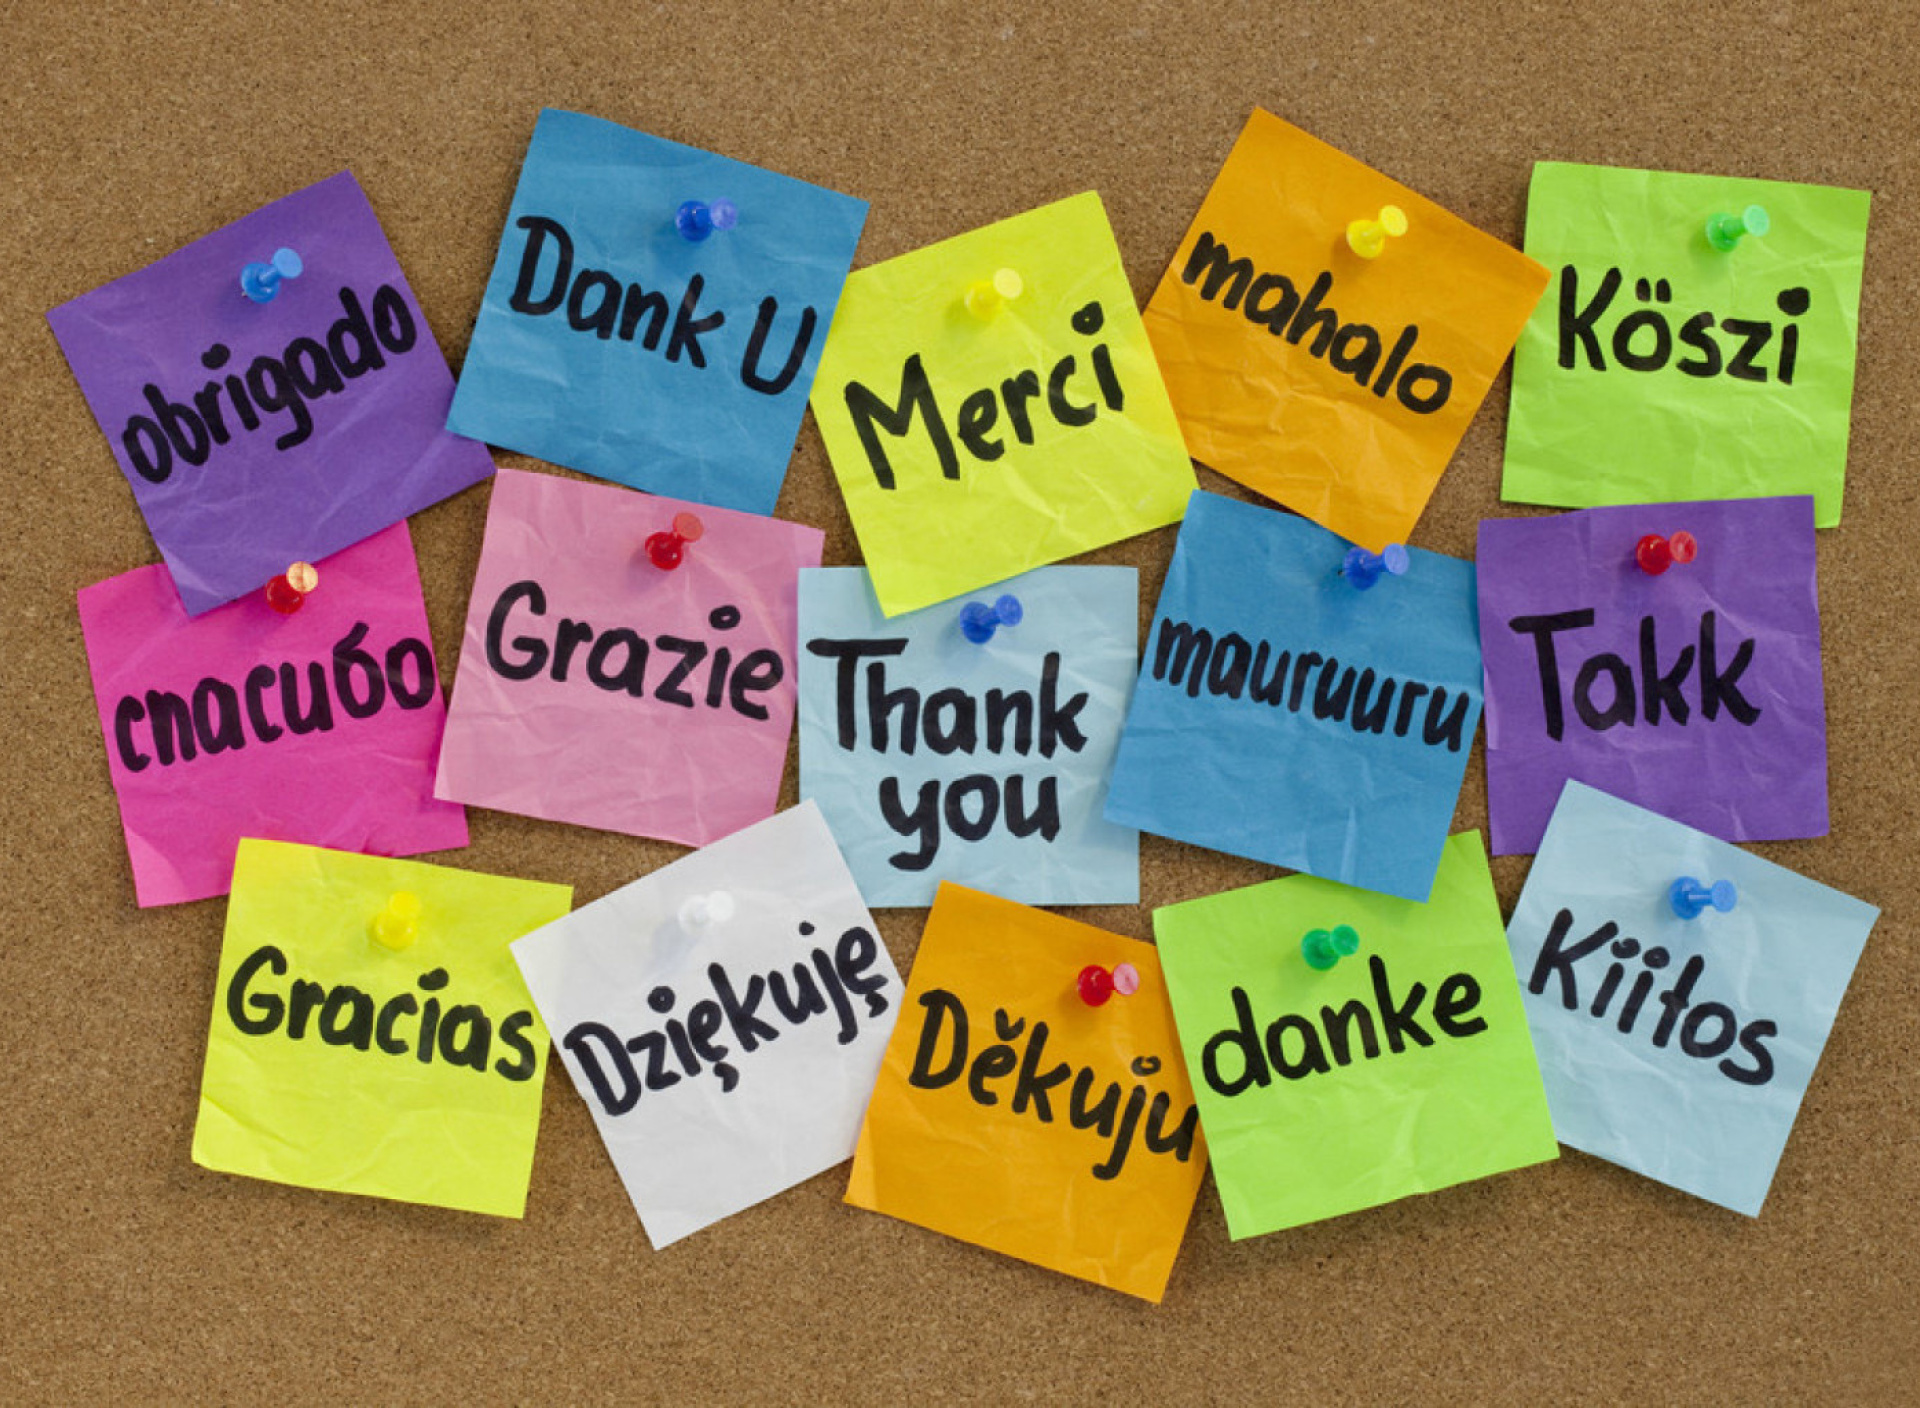 How To Say Thank You in Different Languages wallpaper 1920x1408